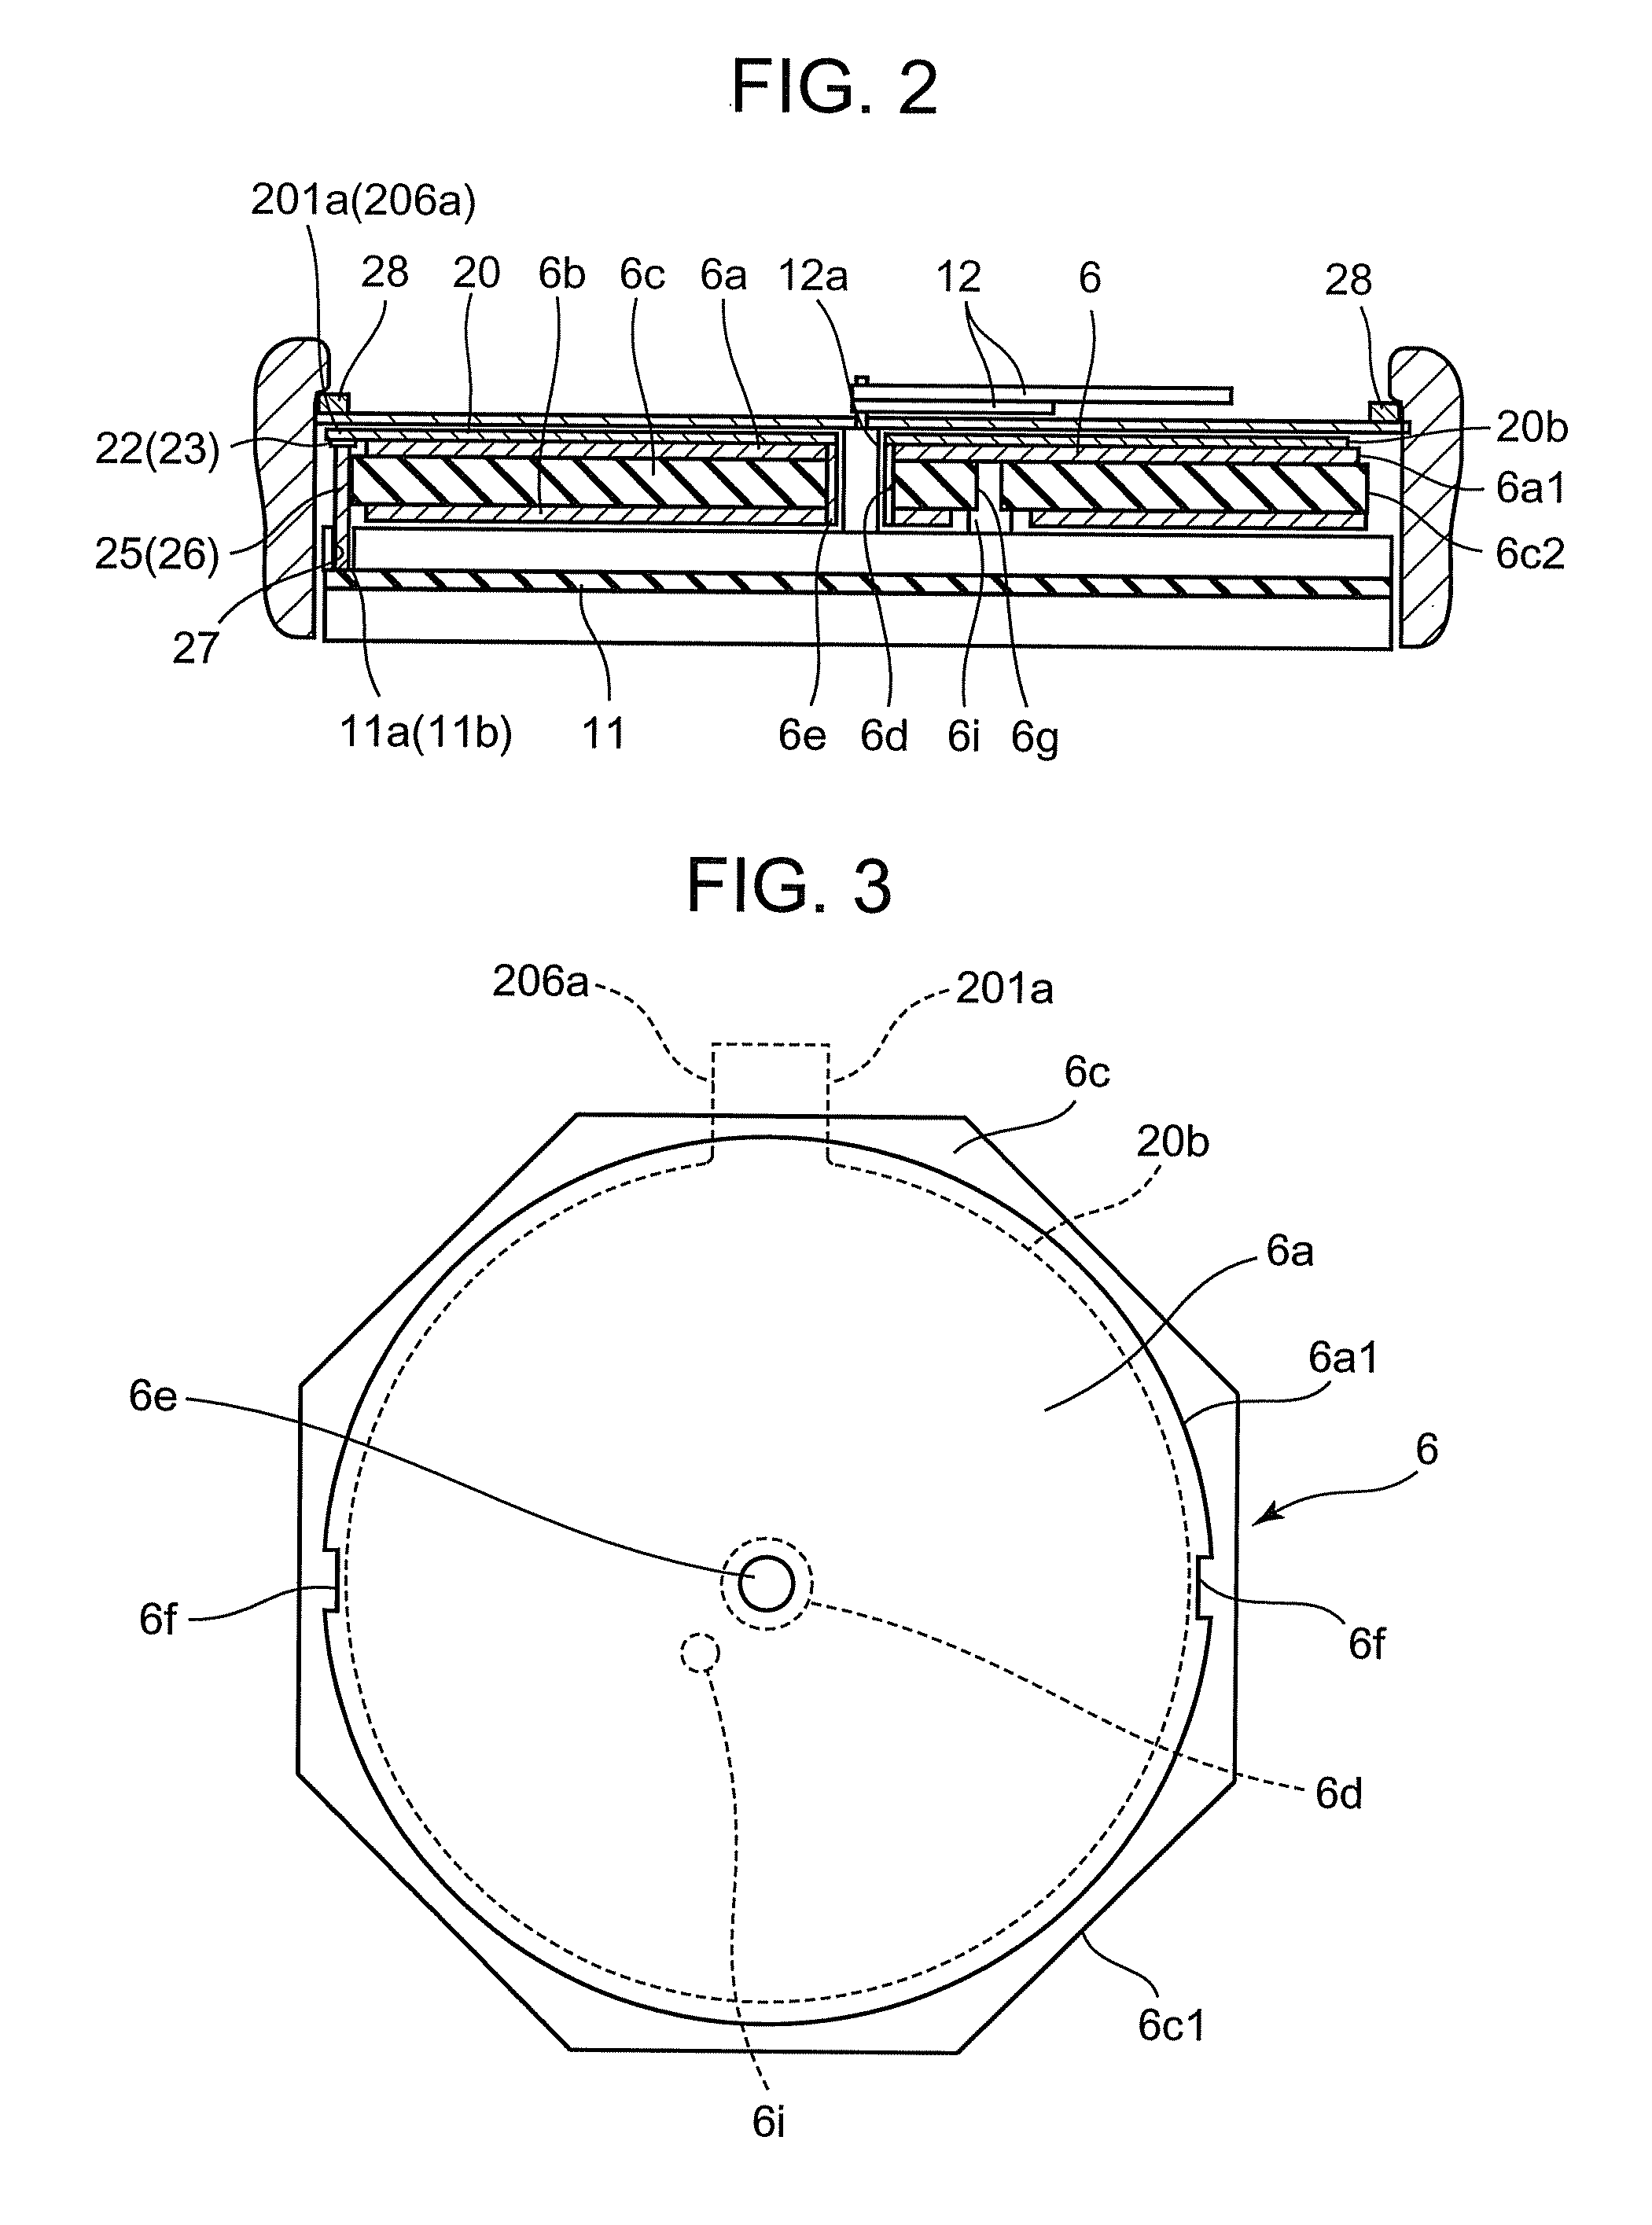 Electronic device equipped with antenna device and solar panel